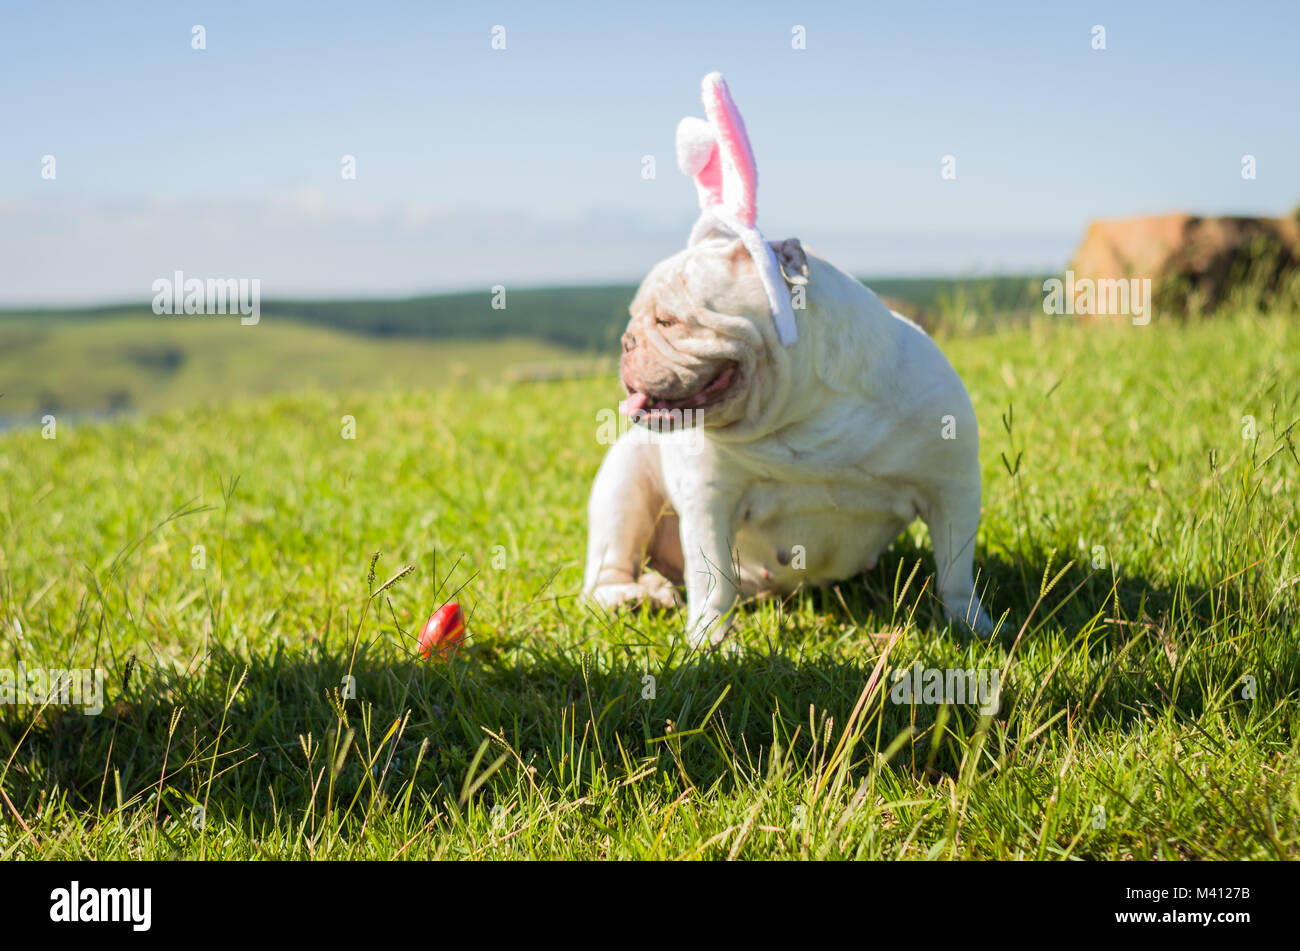 Great concept of Easter. Cute English bulldog breed dog dressed as Easter bunny running on the lawn. Stock Photo